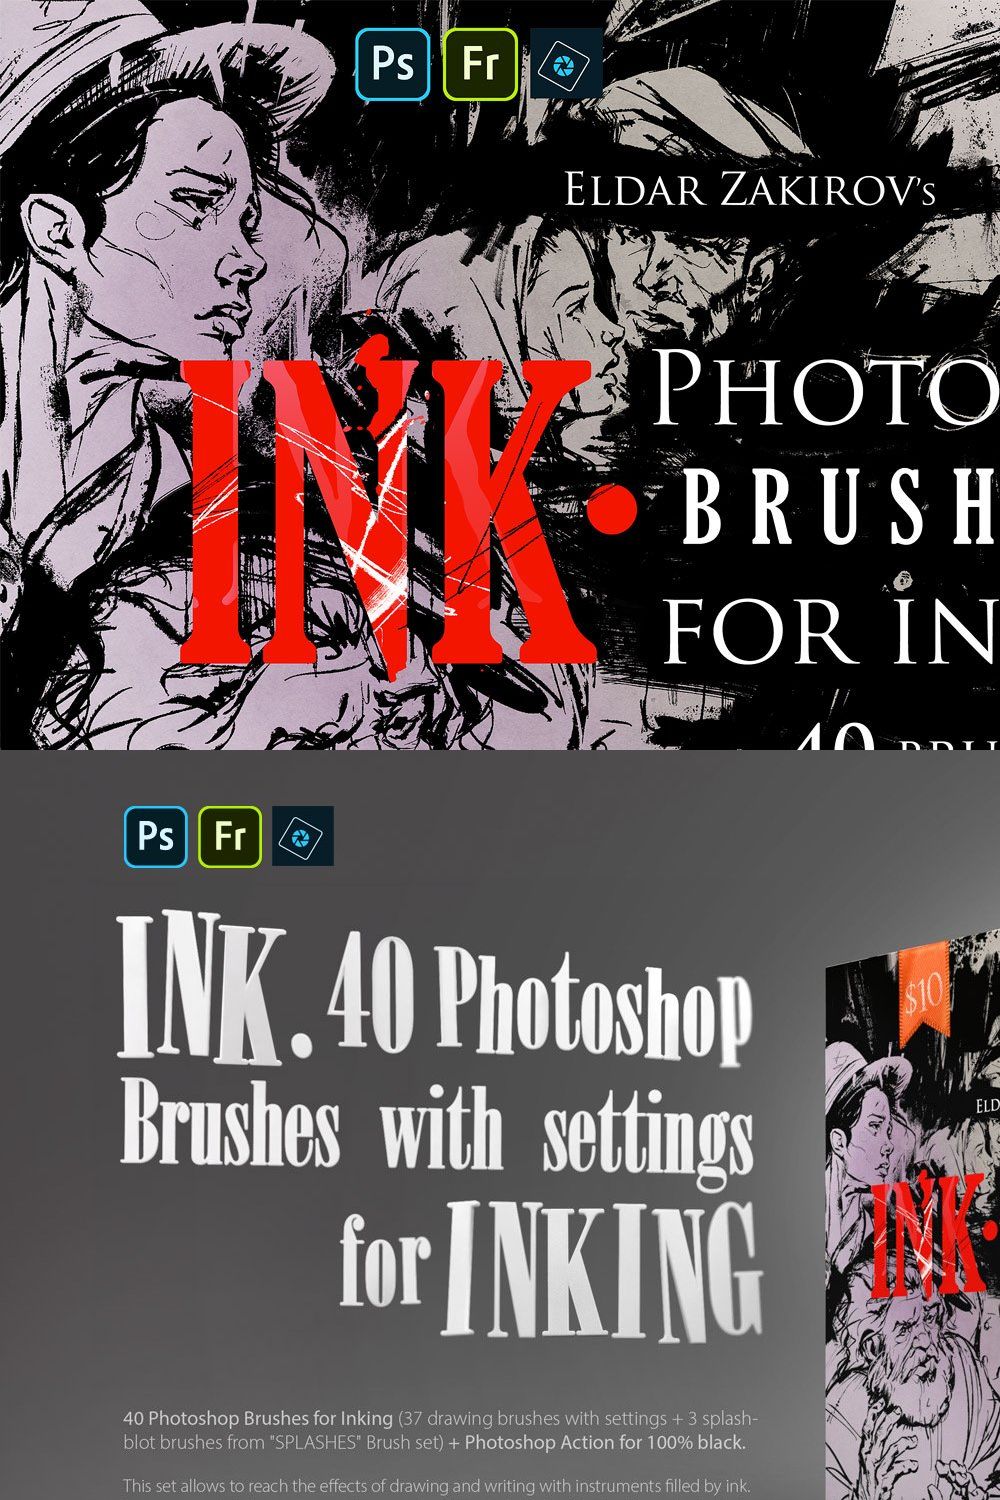 INK. 40 Photoshop Brushes for Inking pinterest preview image.